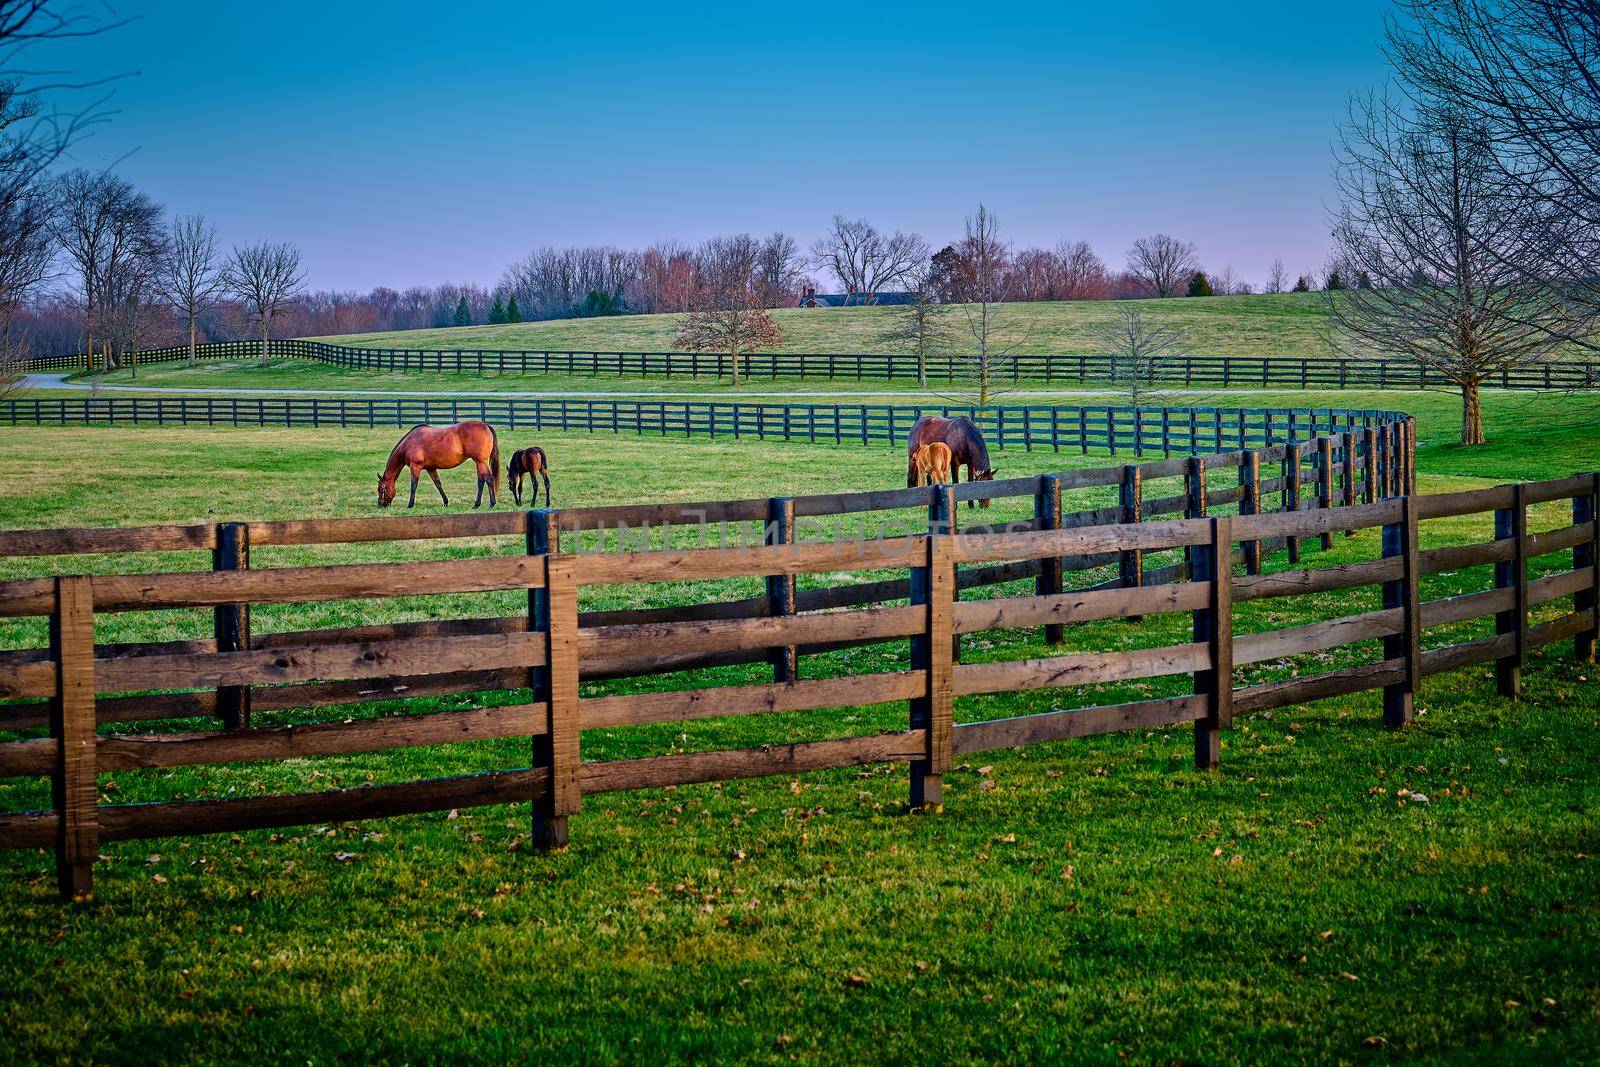 A pair of mares and foals grazing on early spring grass at a thoroughbred farm.